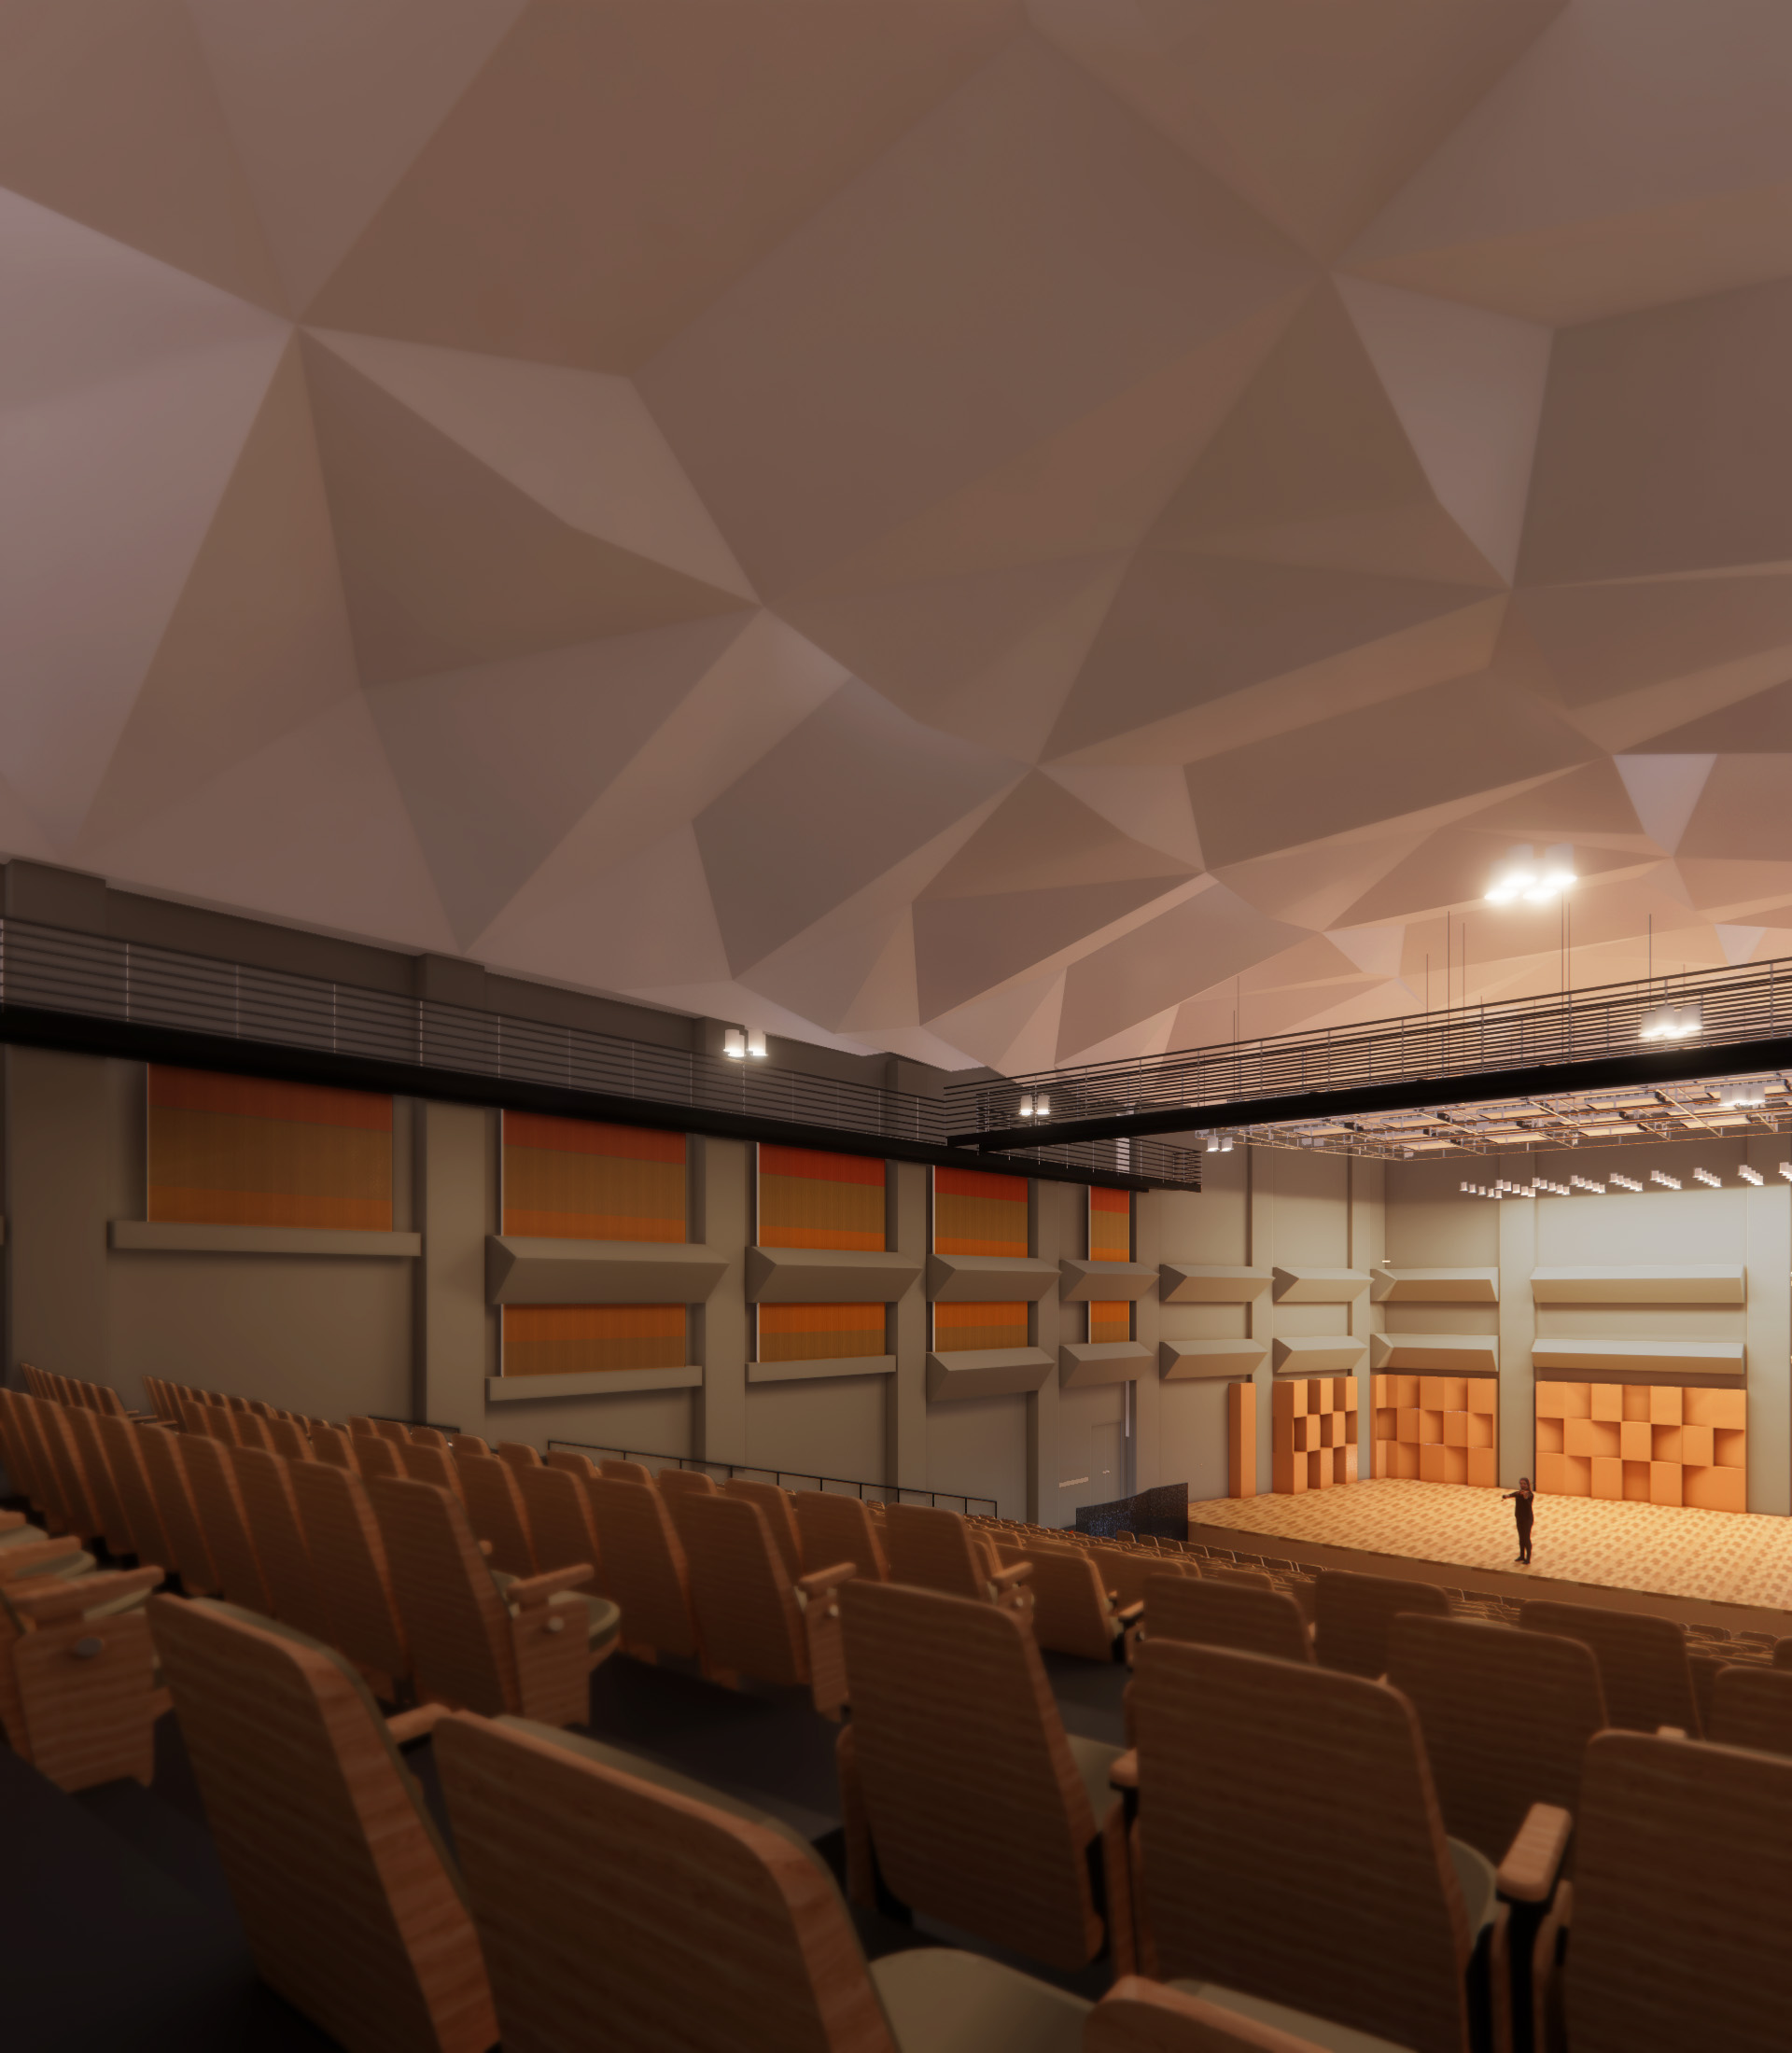 Architectural rendering of renovated Pollack Hall from audience perspective